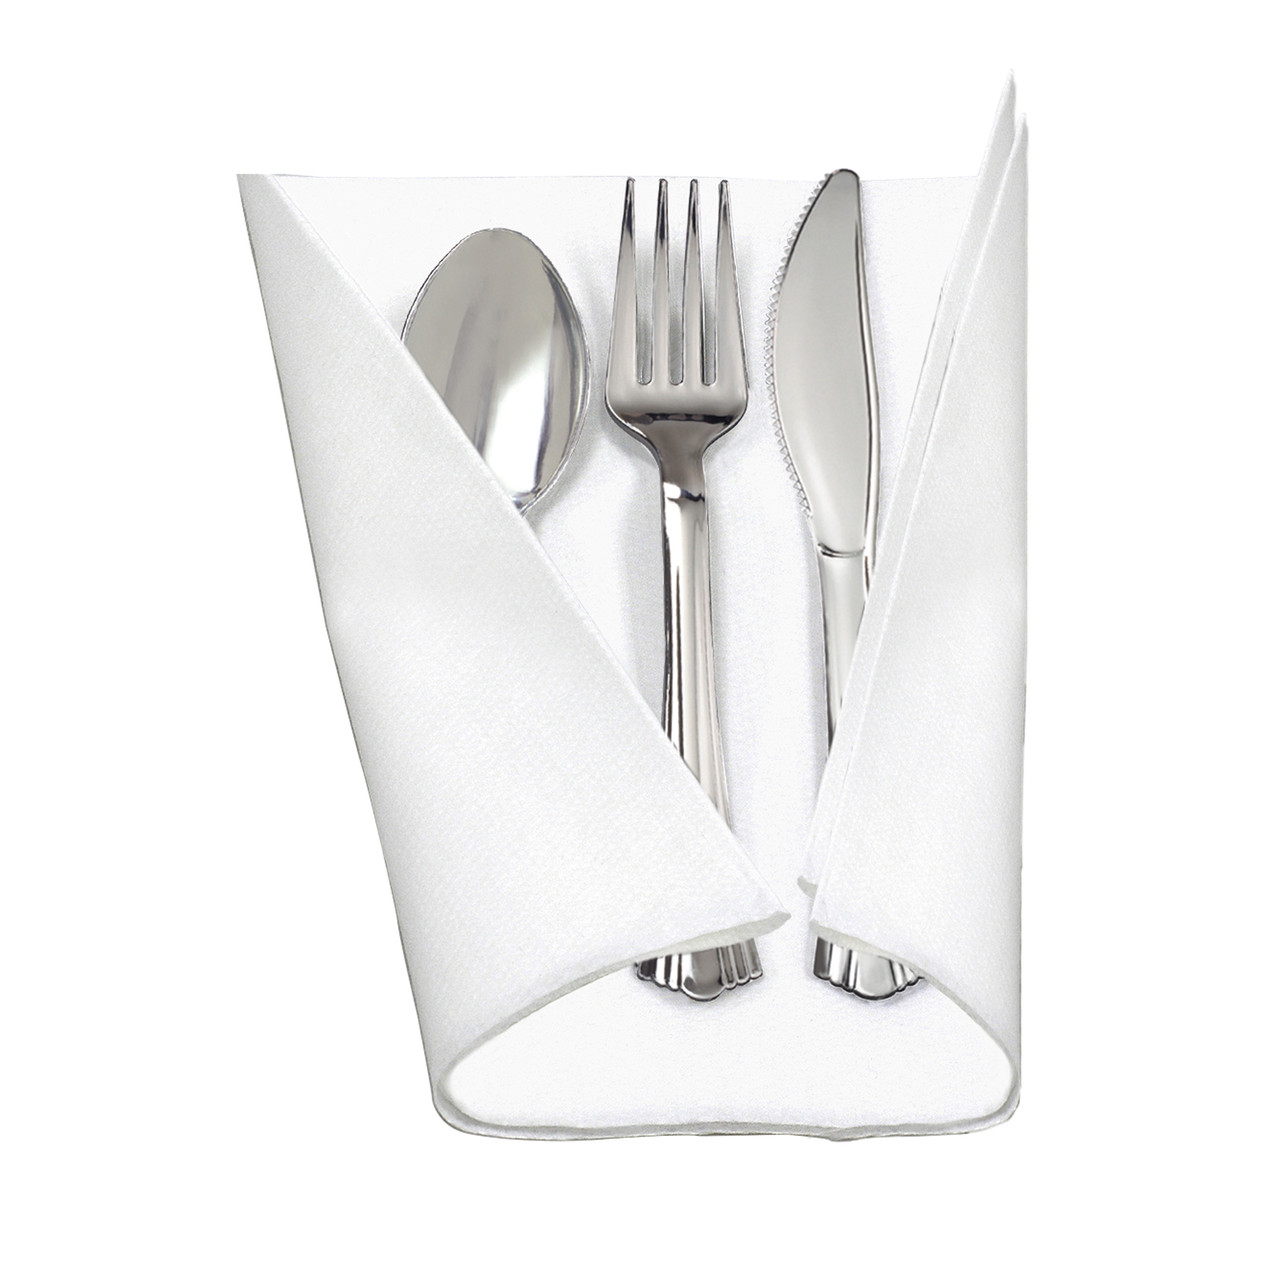 Reflections® Cutlery Napkin Rolls F/K/S in WH Linen-Quality 17x17” (432x432mm) Napkin Roll (REFROLL3)